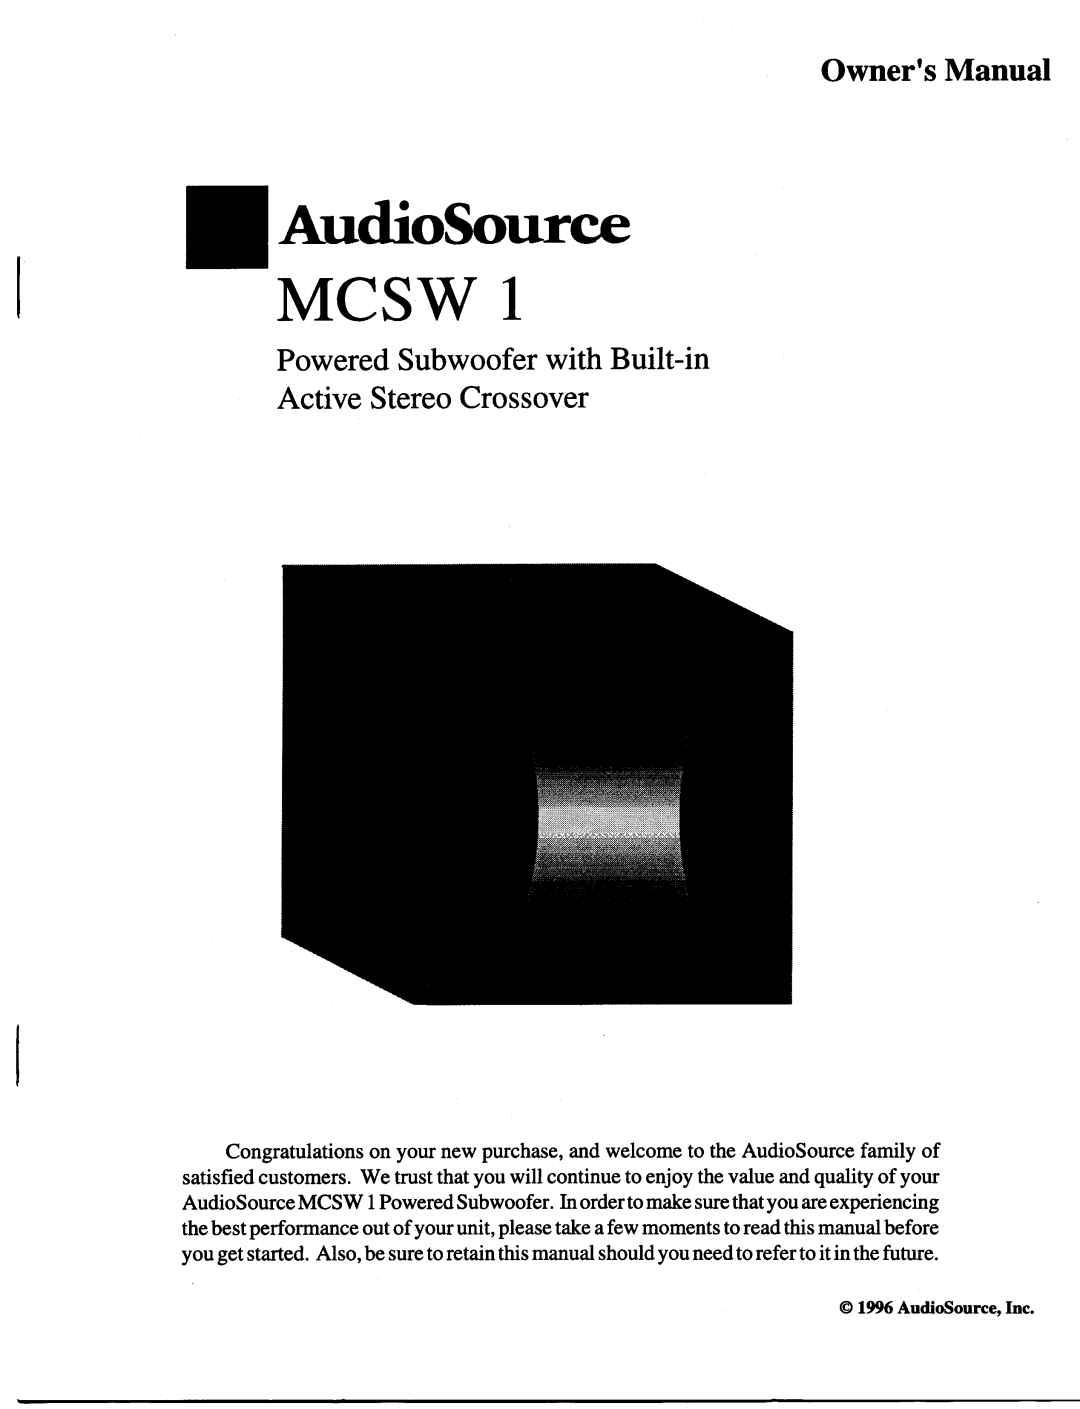 AudioSource Powered Subwoofer with Built-in Active Stereo Crossover, MCSW 1 manual 